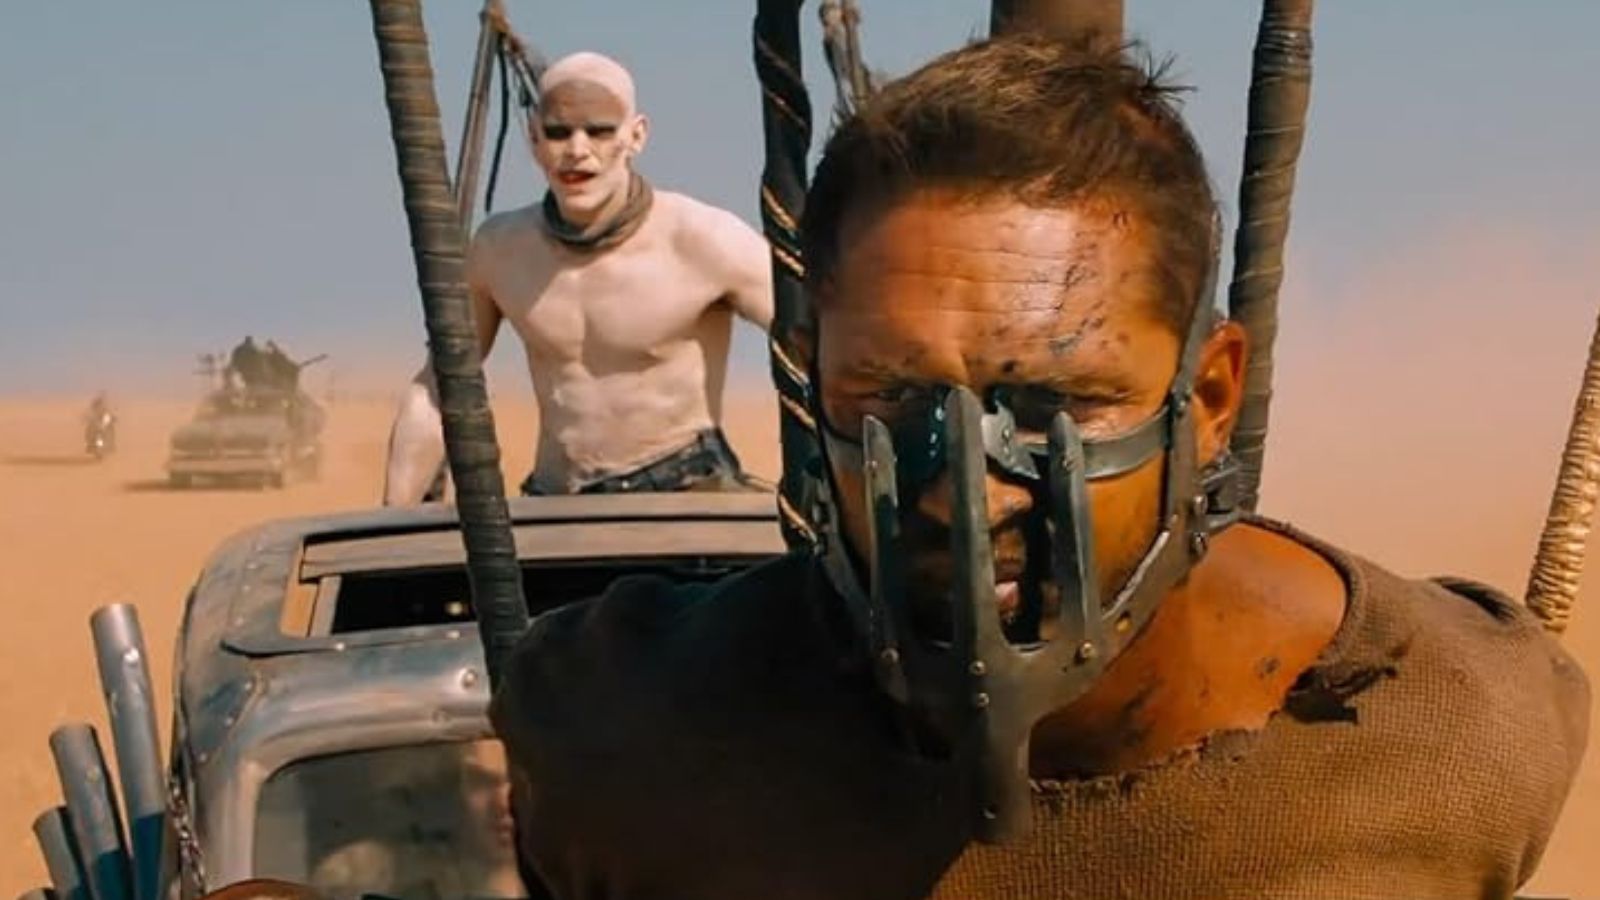 Set in a post-apocalyptic wasteland, Mad Max: Fury Road sees Max (Tom Hardy) join up with Furiosa (Charlize Theron). Although Max’s primary mission is to escape, Furiosa wants revenge on road chief Immortan Joe and will stop at nothing to get it.